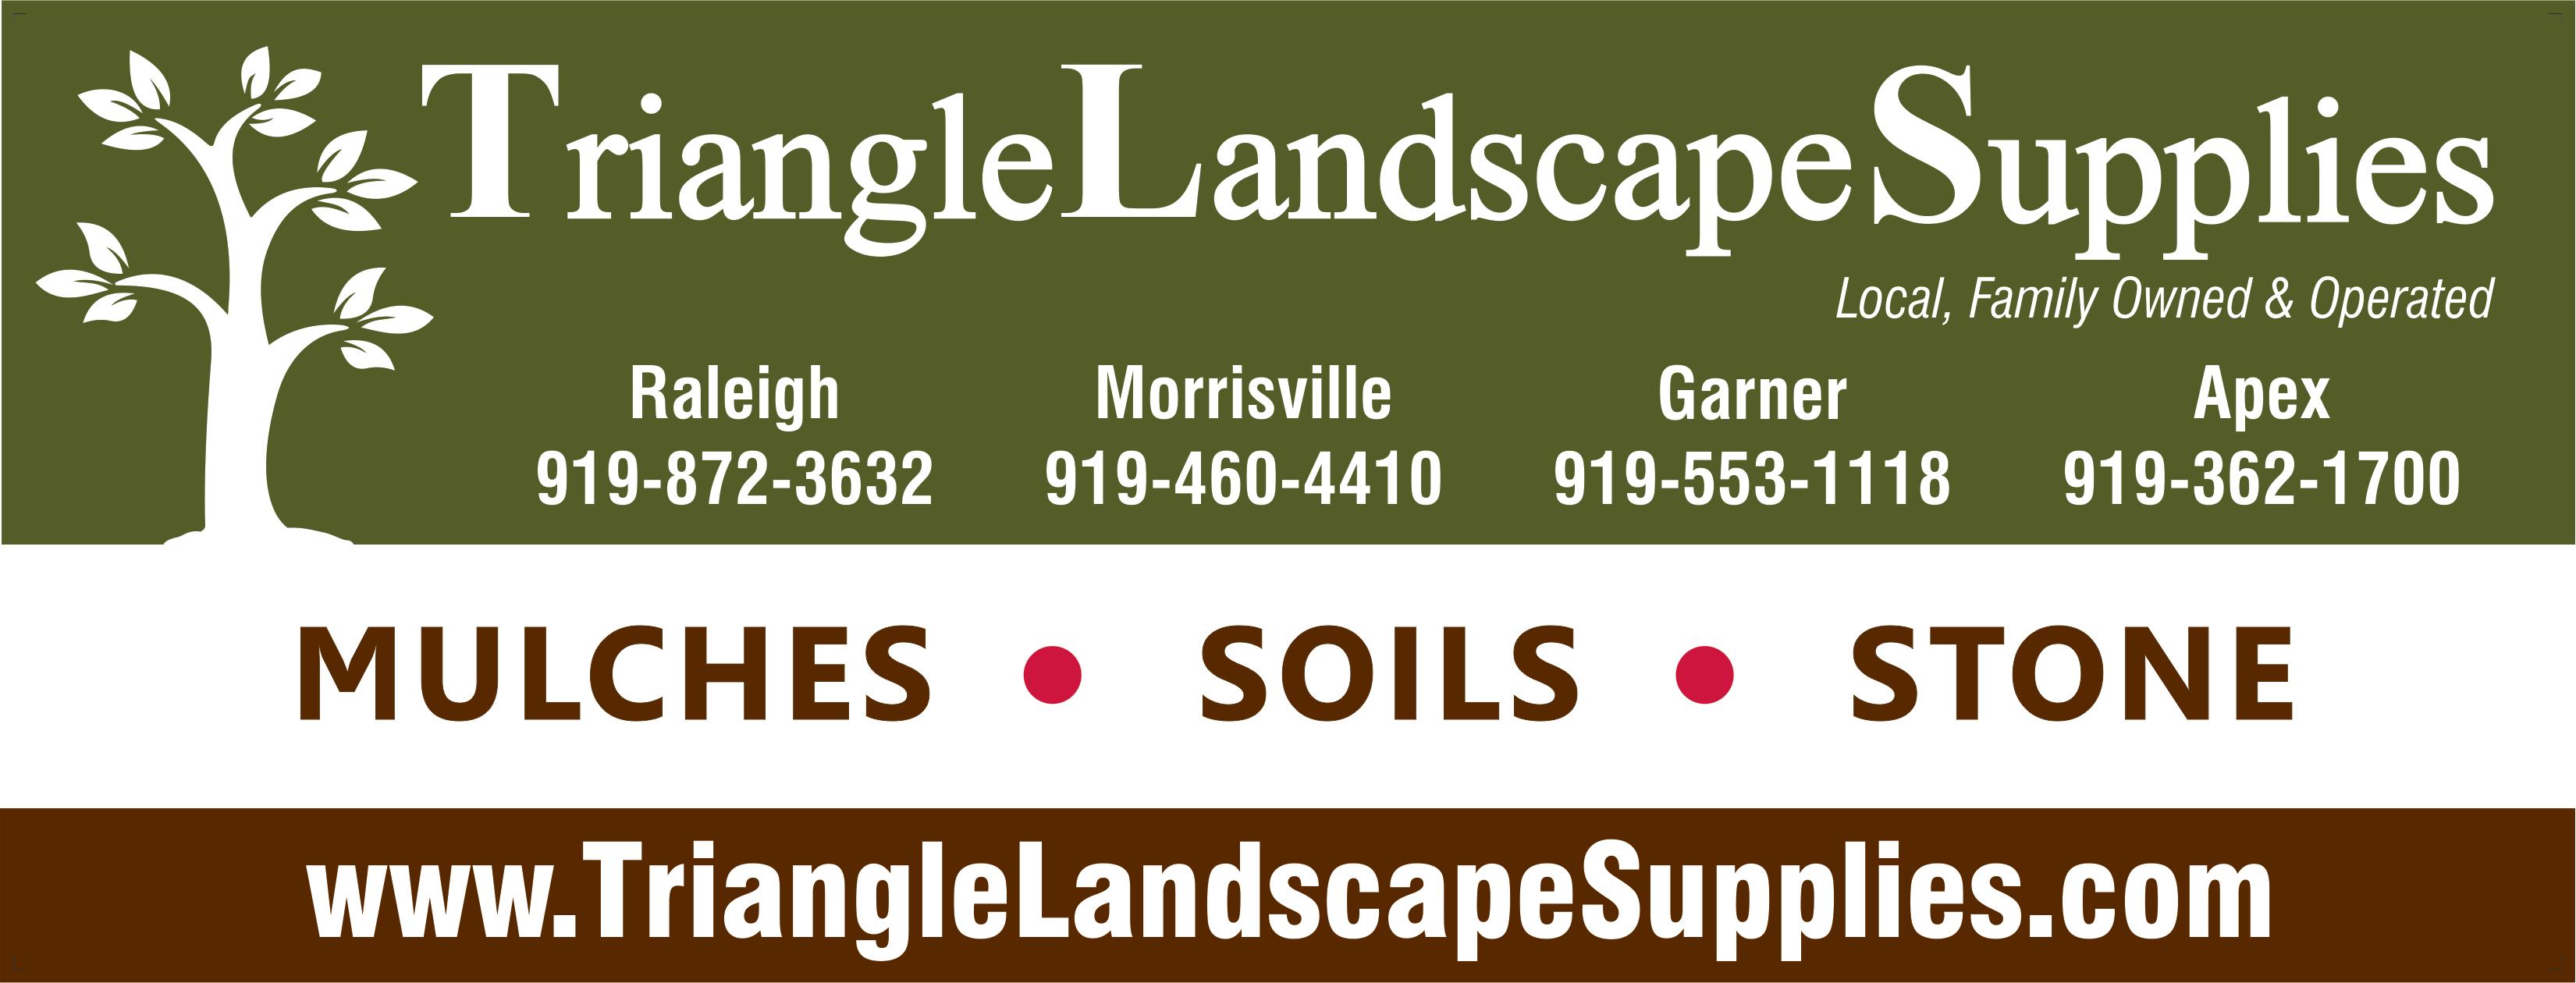 Triangle Landscape Supplies, Raleigh Photo